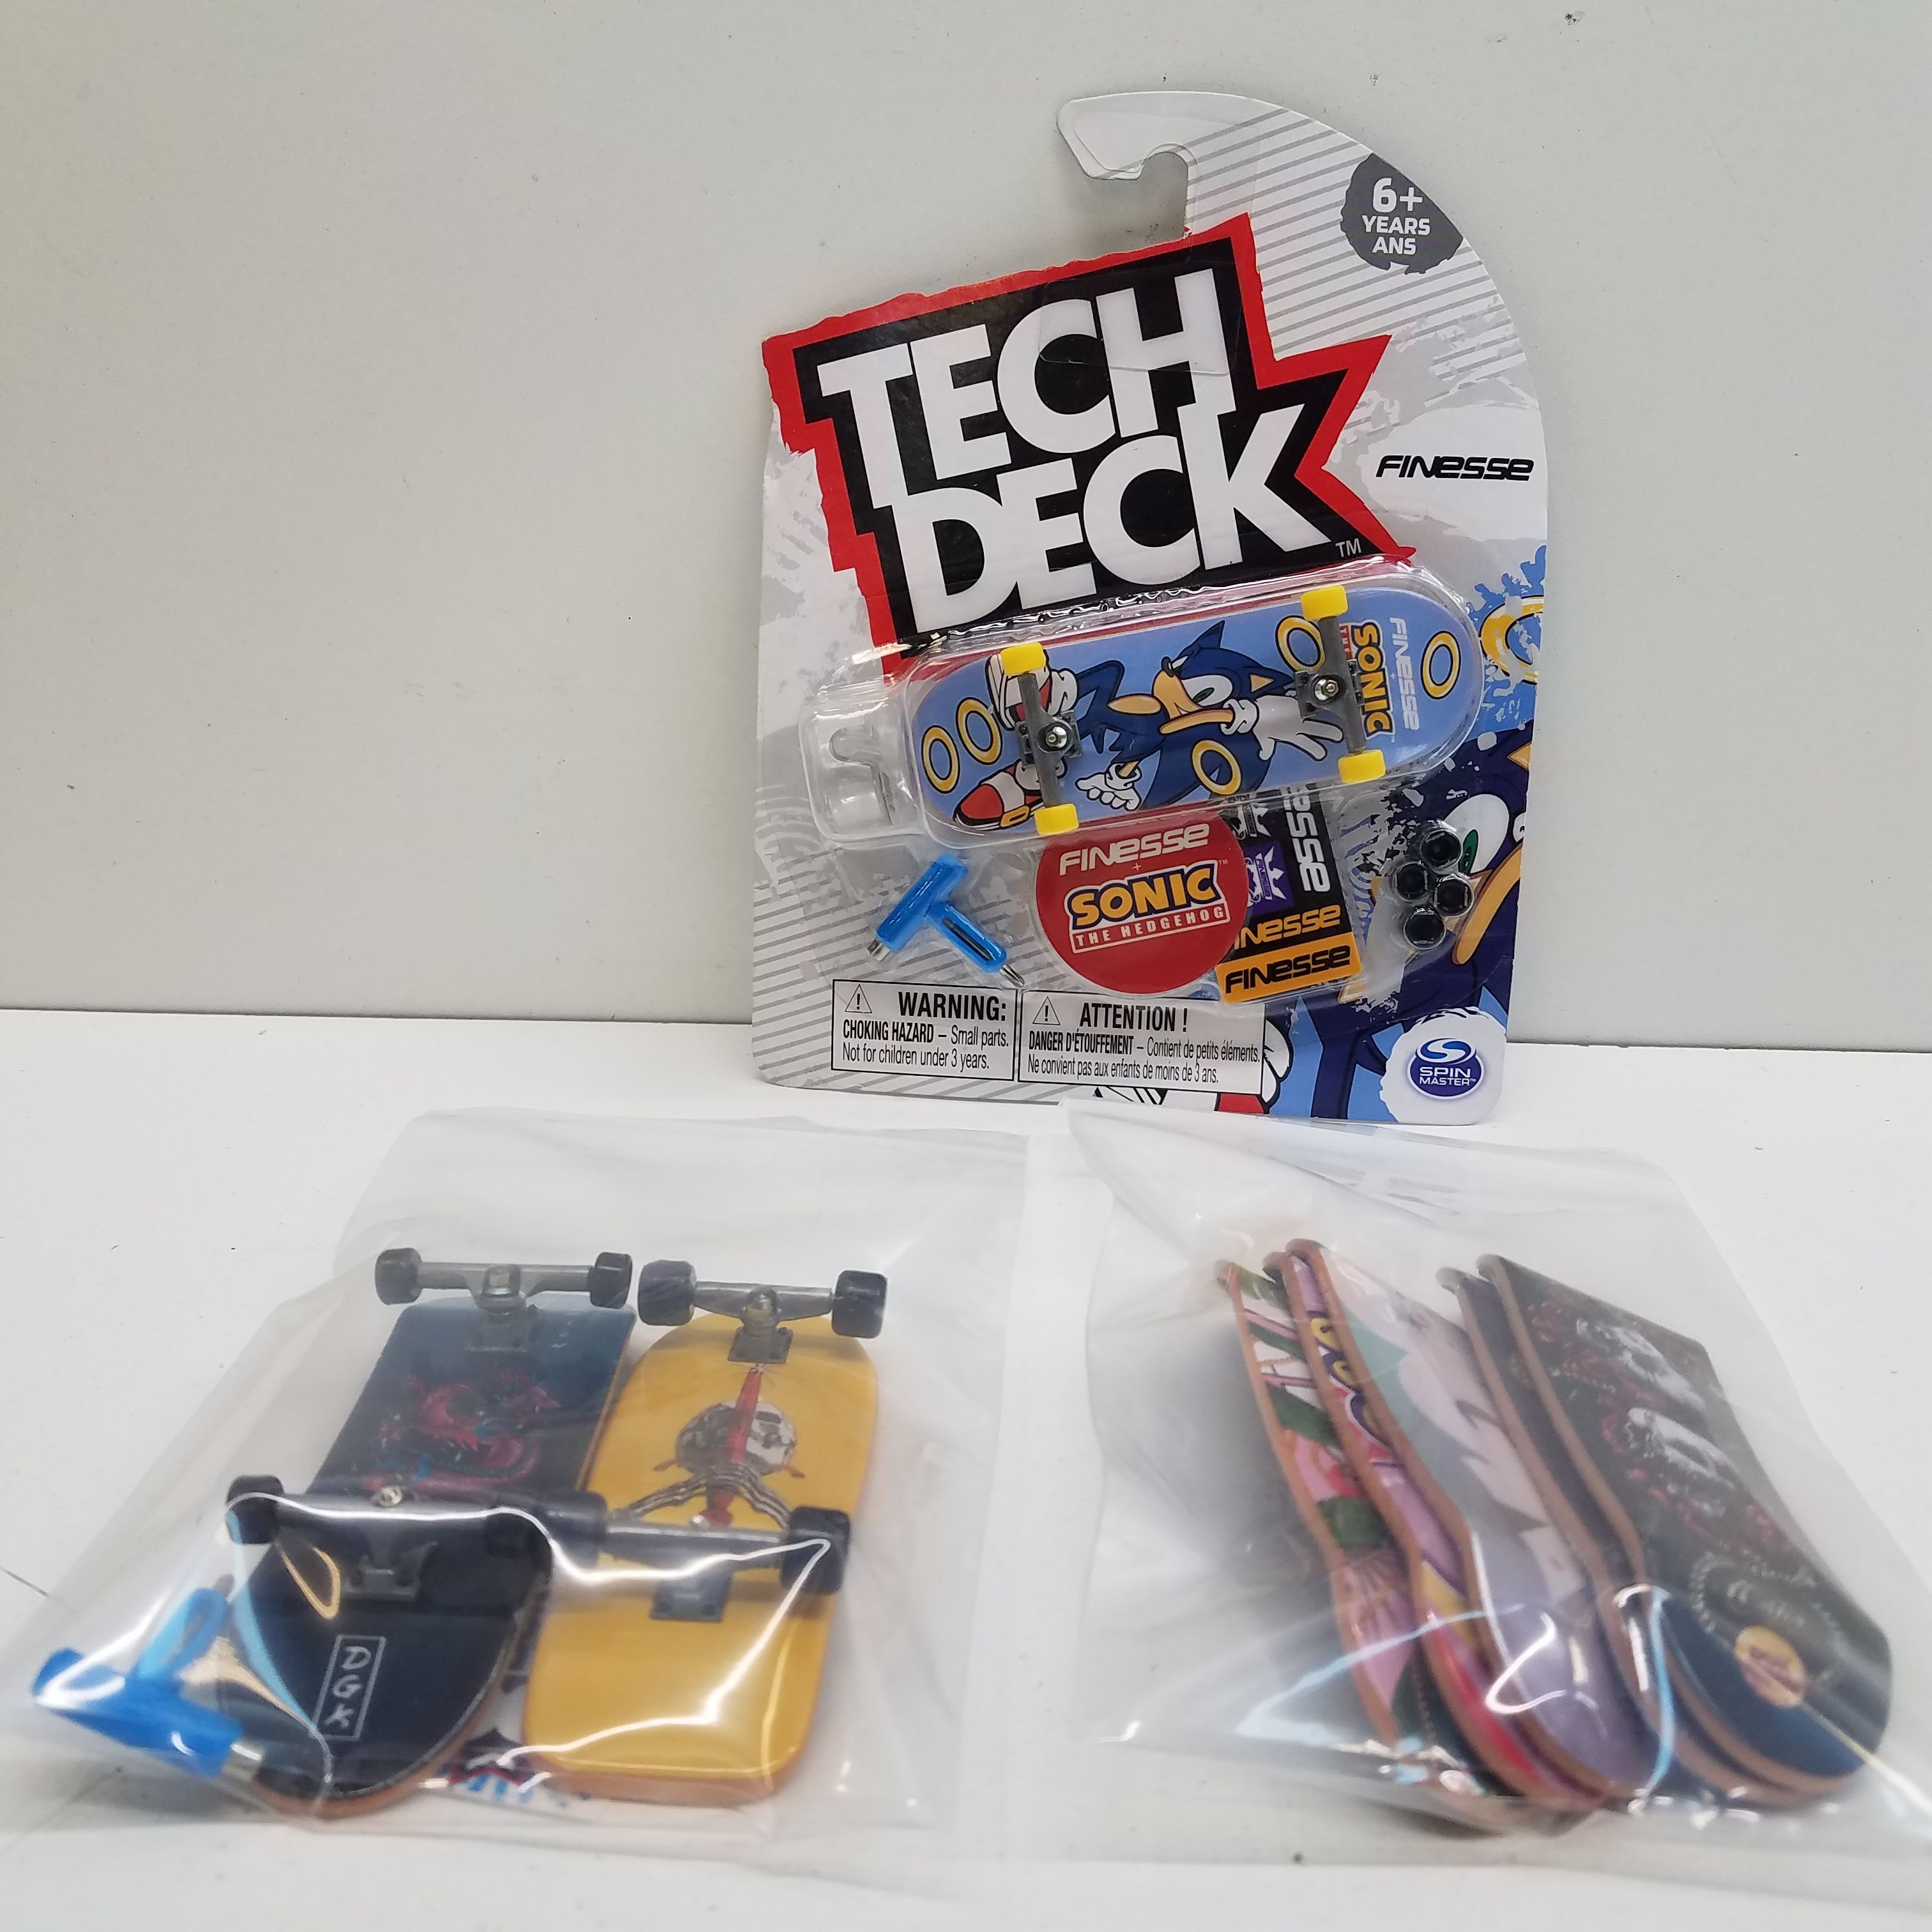 Buy the Mixed Tech Deck Fingerboards & Accessories Bundle (Set Of 8)